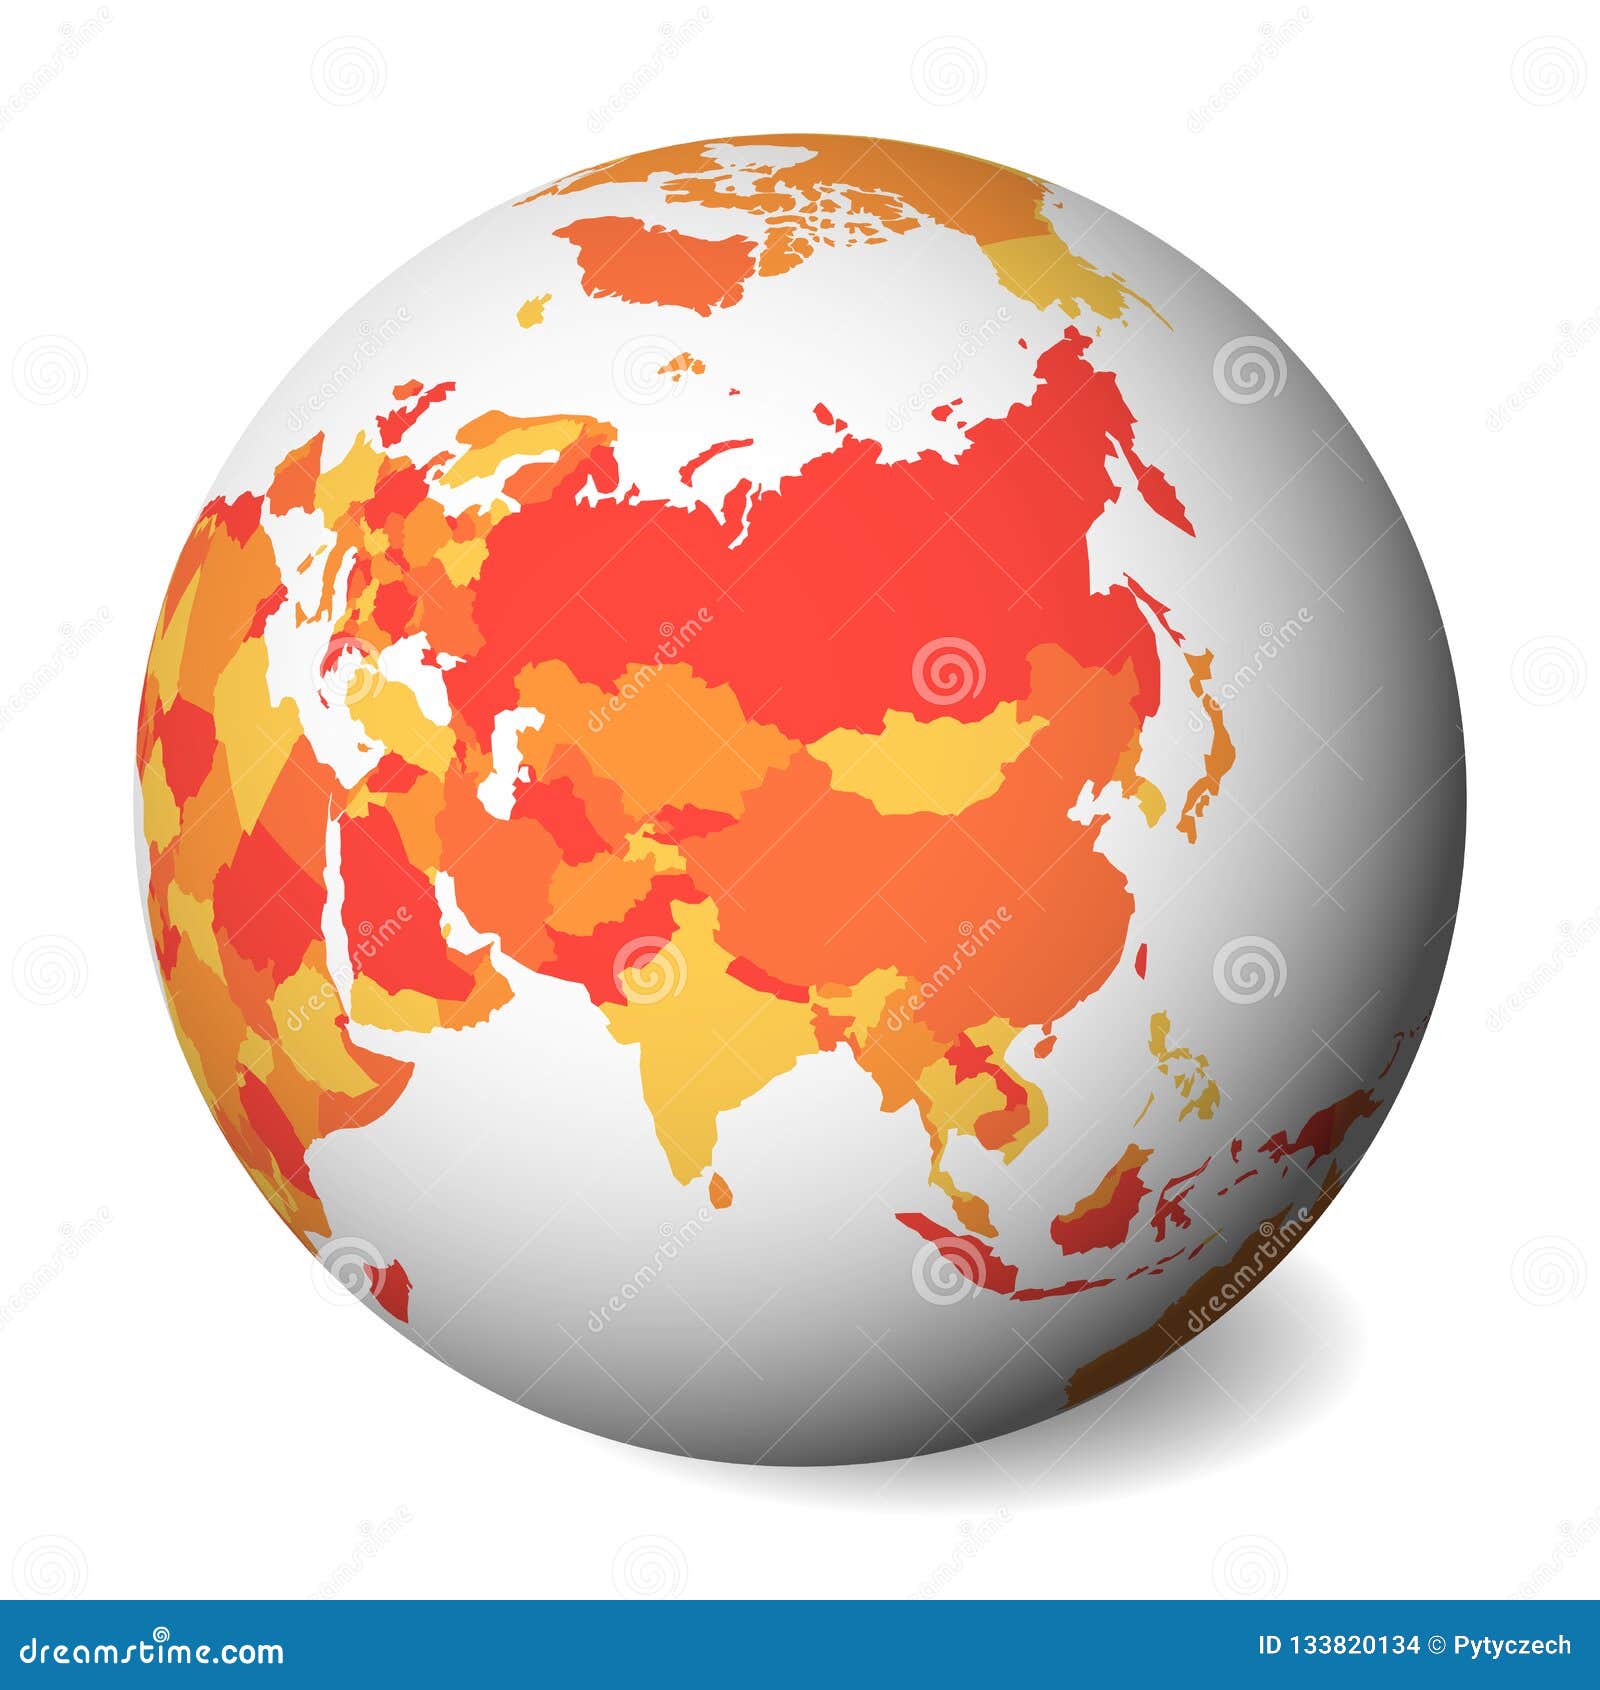 Blank Political Map Of Asia 3d Earth Globe With Orange Map Vector